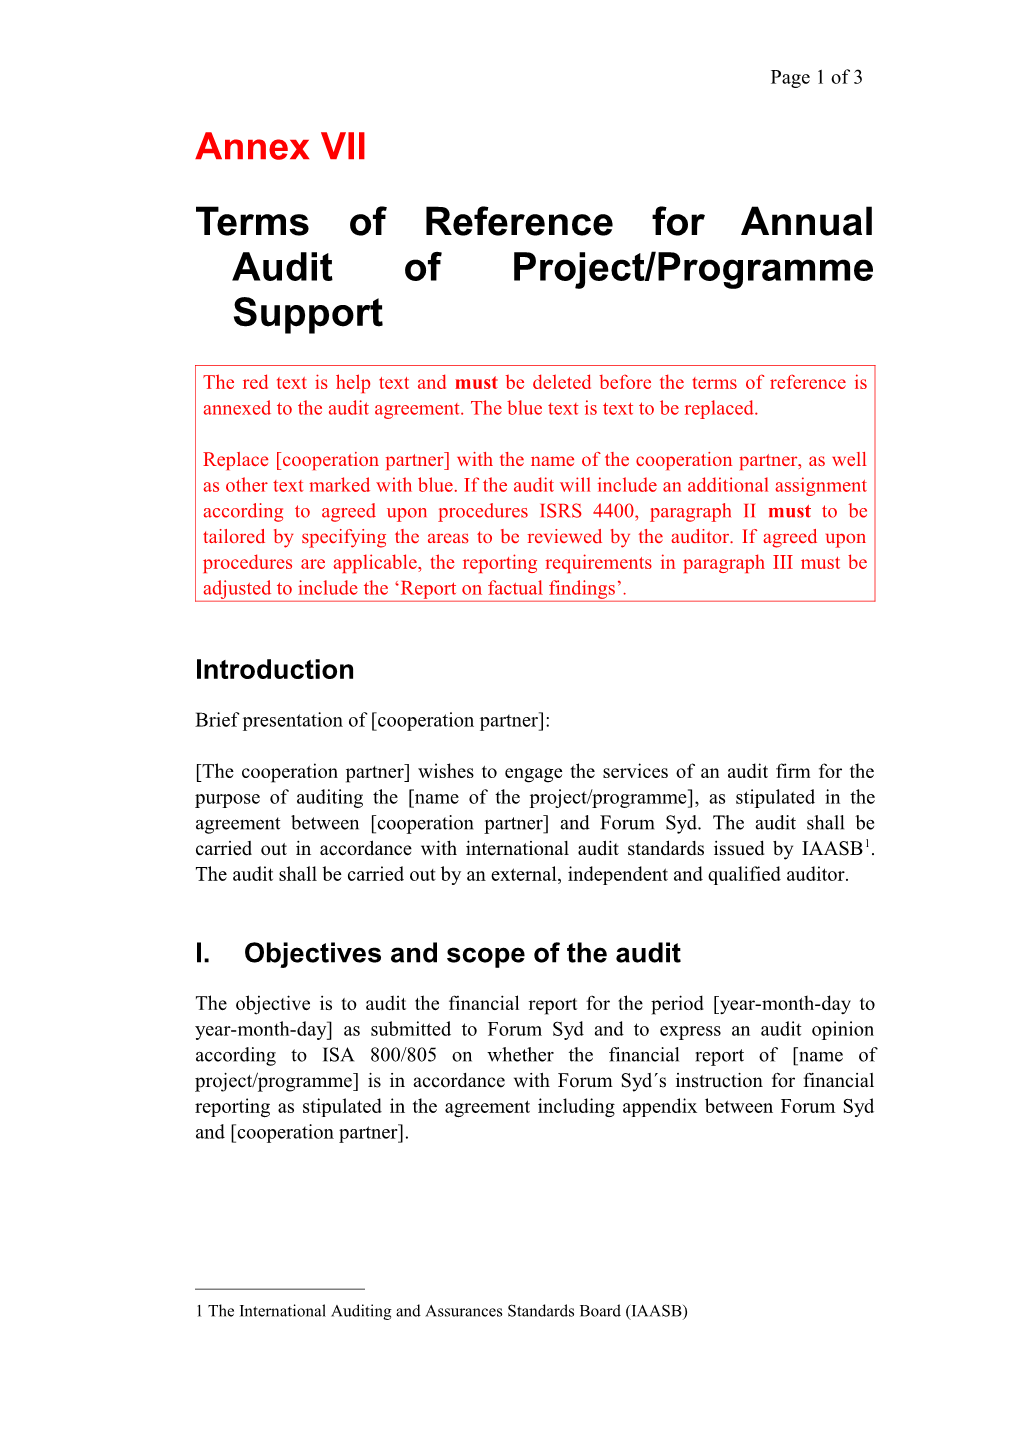 Terms of Reference for Annual Audit of Project/Programme Support